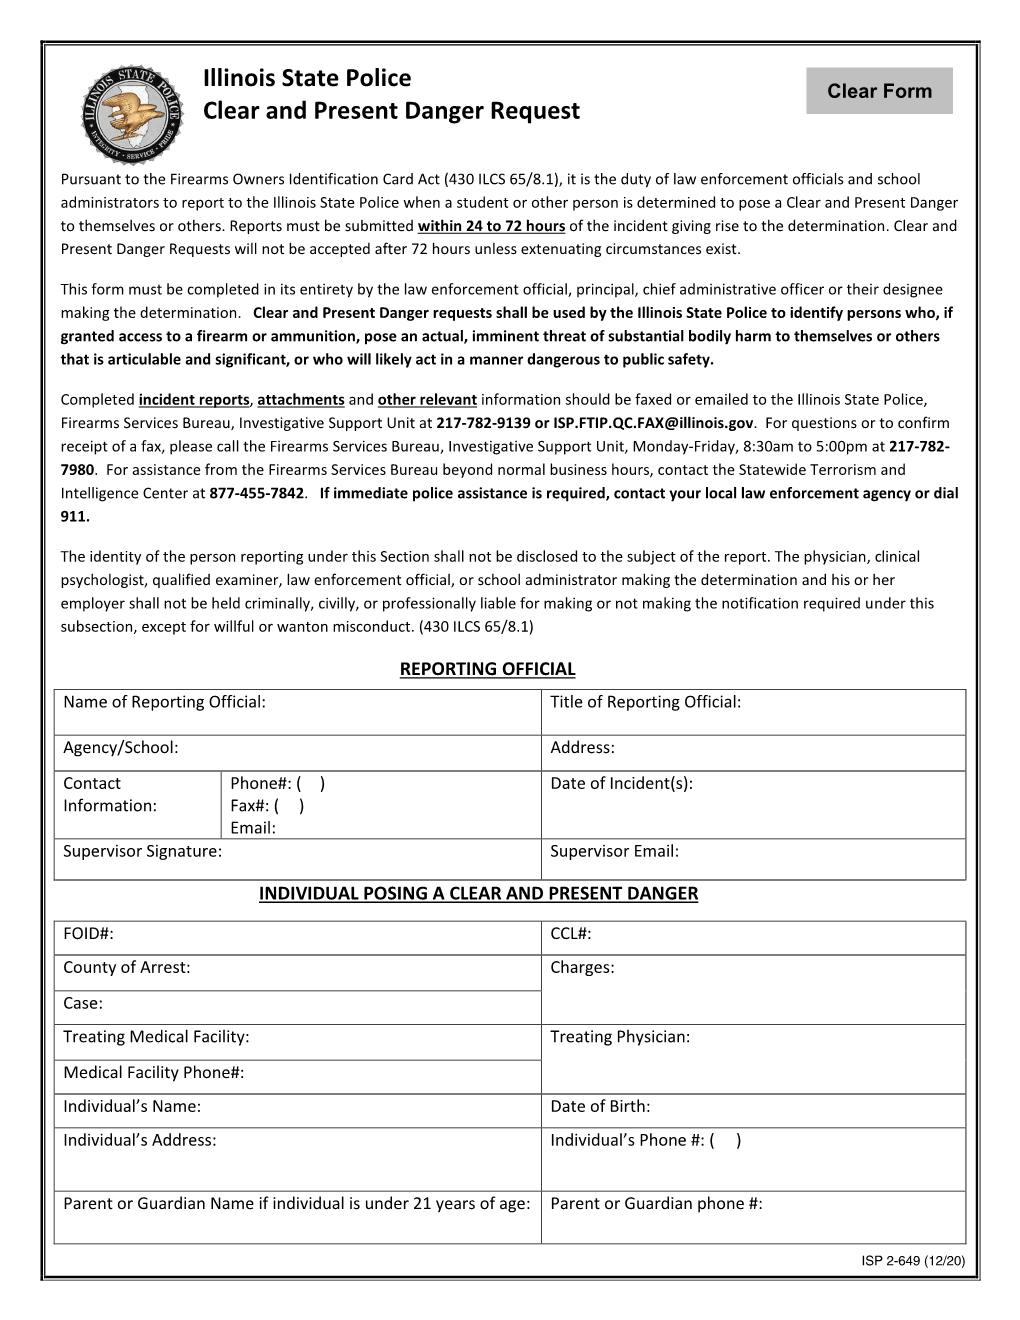 Illinois State Police Clear and Present Danger Request